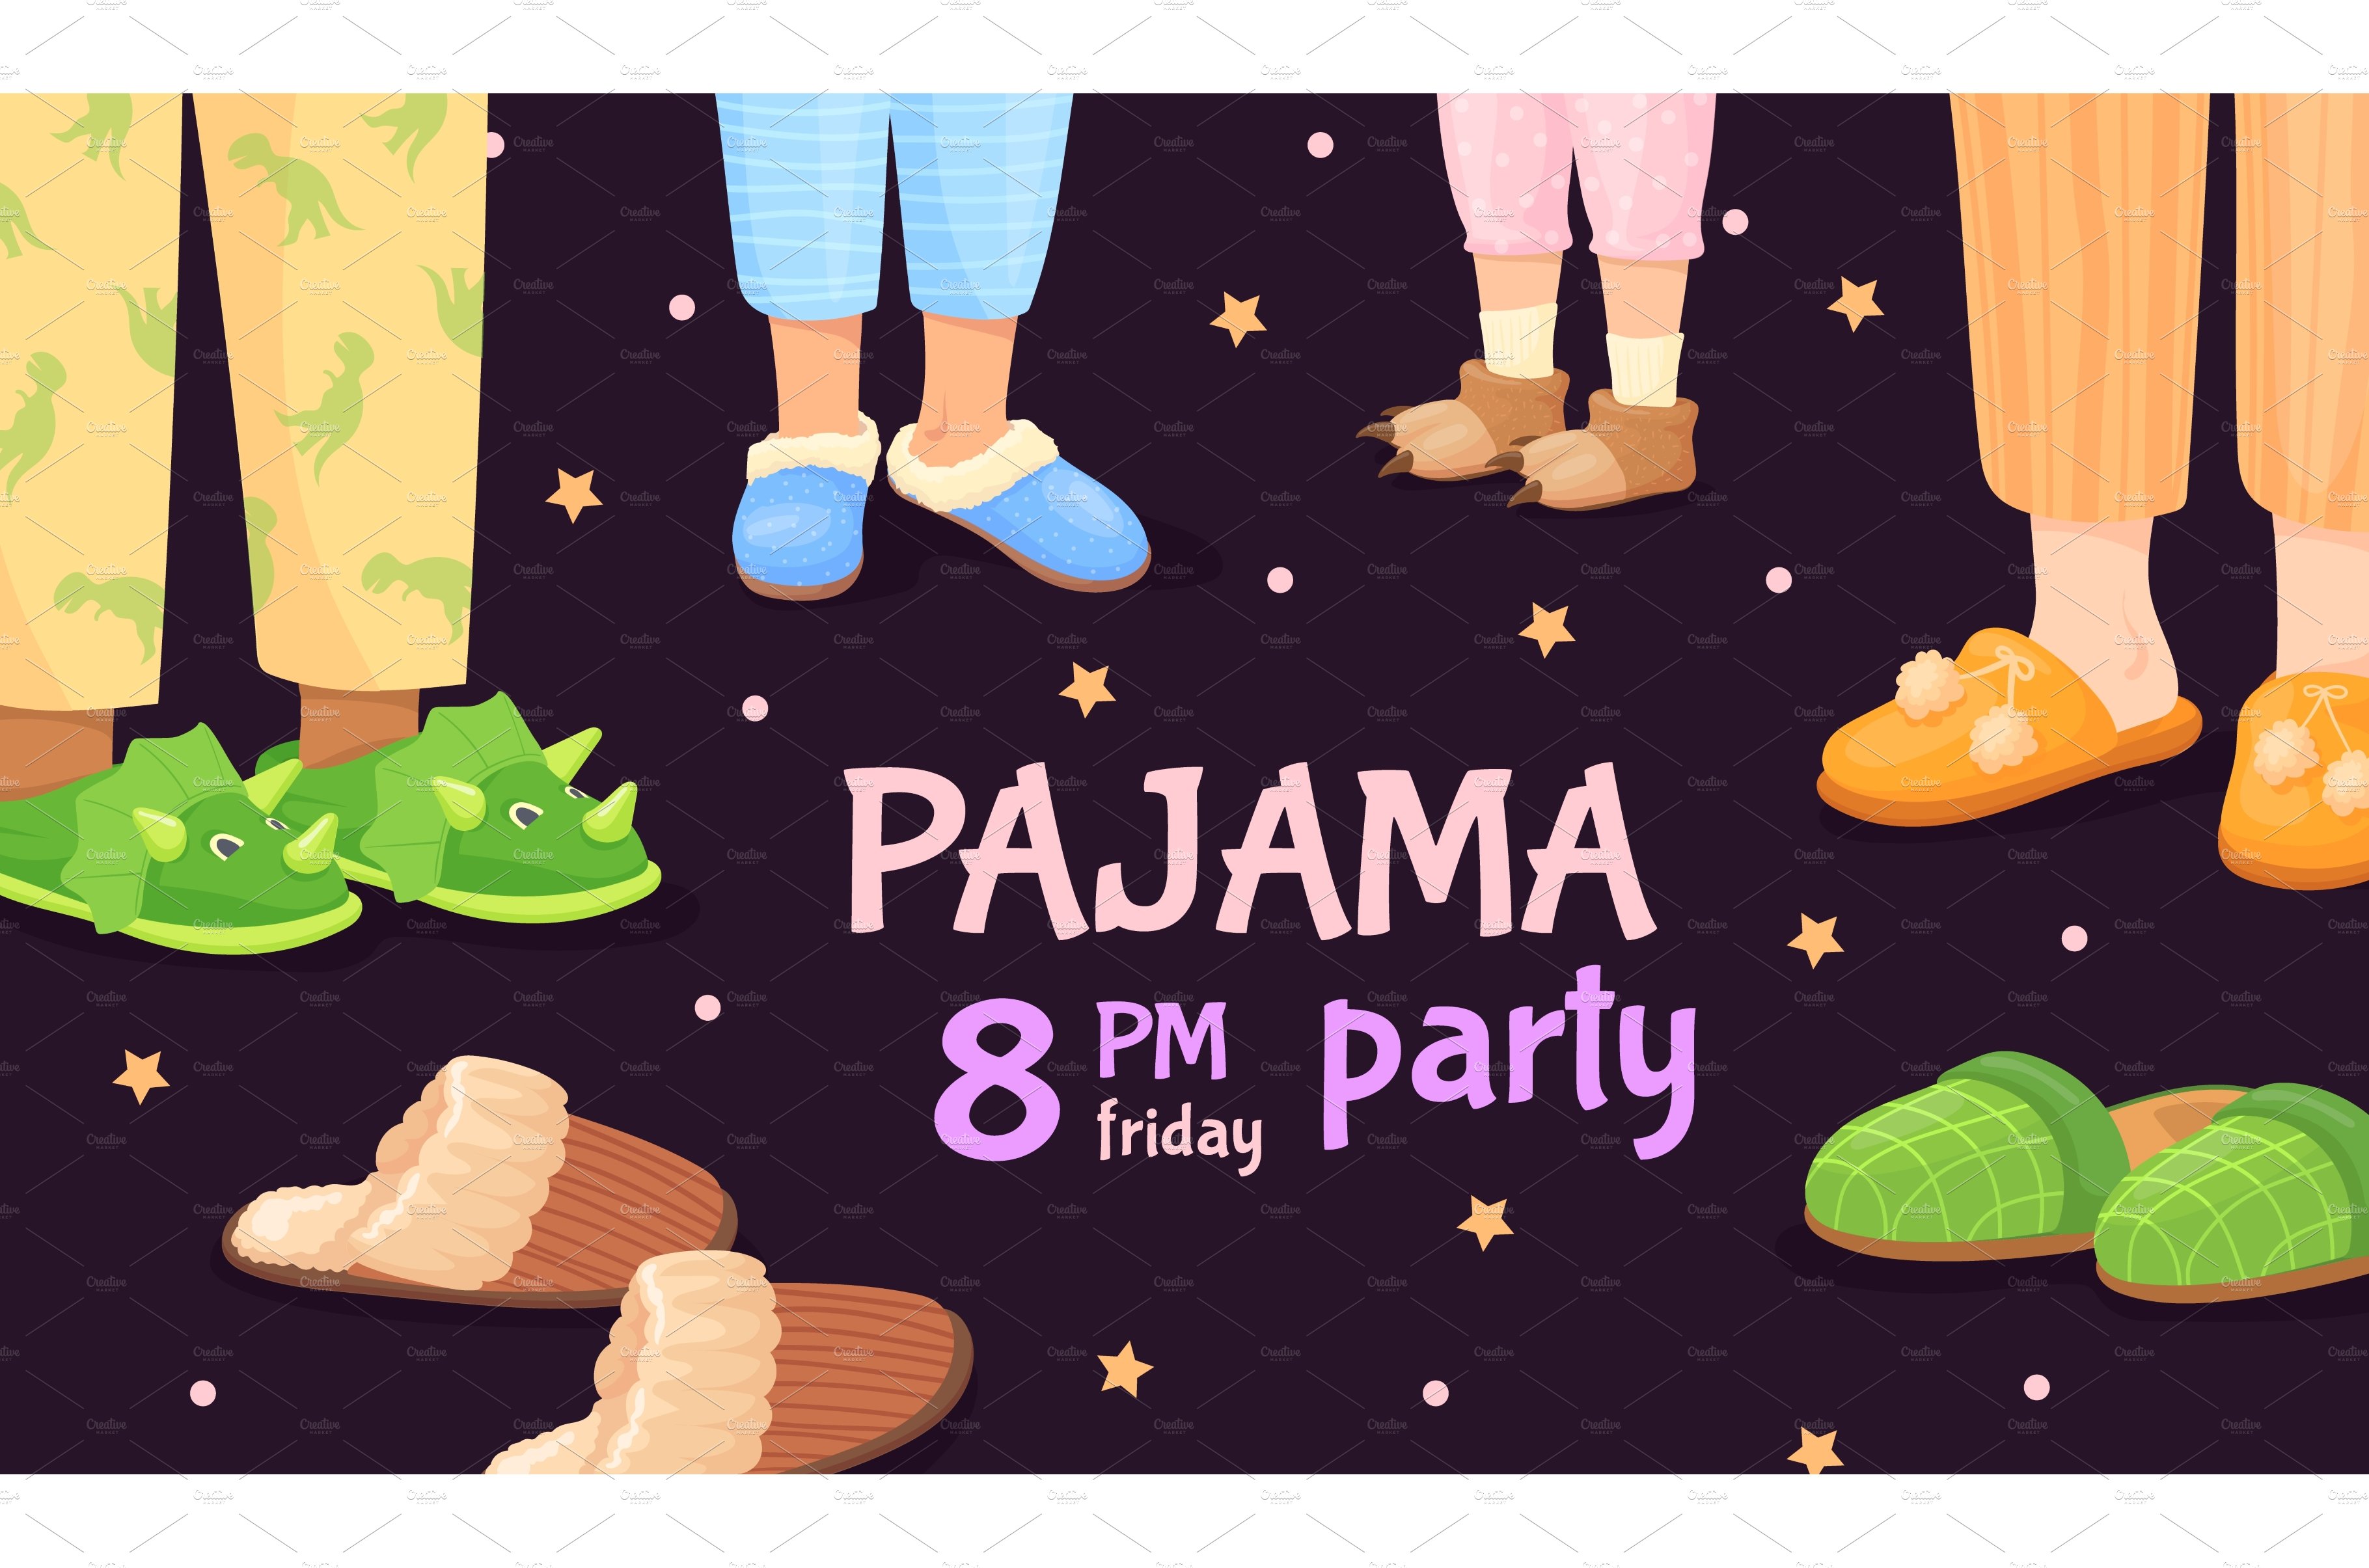 Pajama party. Sleepover invite for cover image.